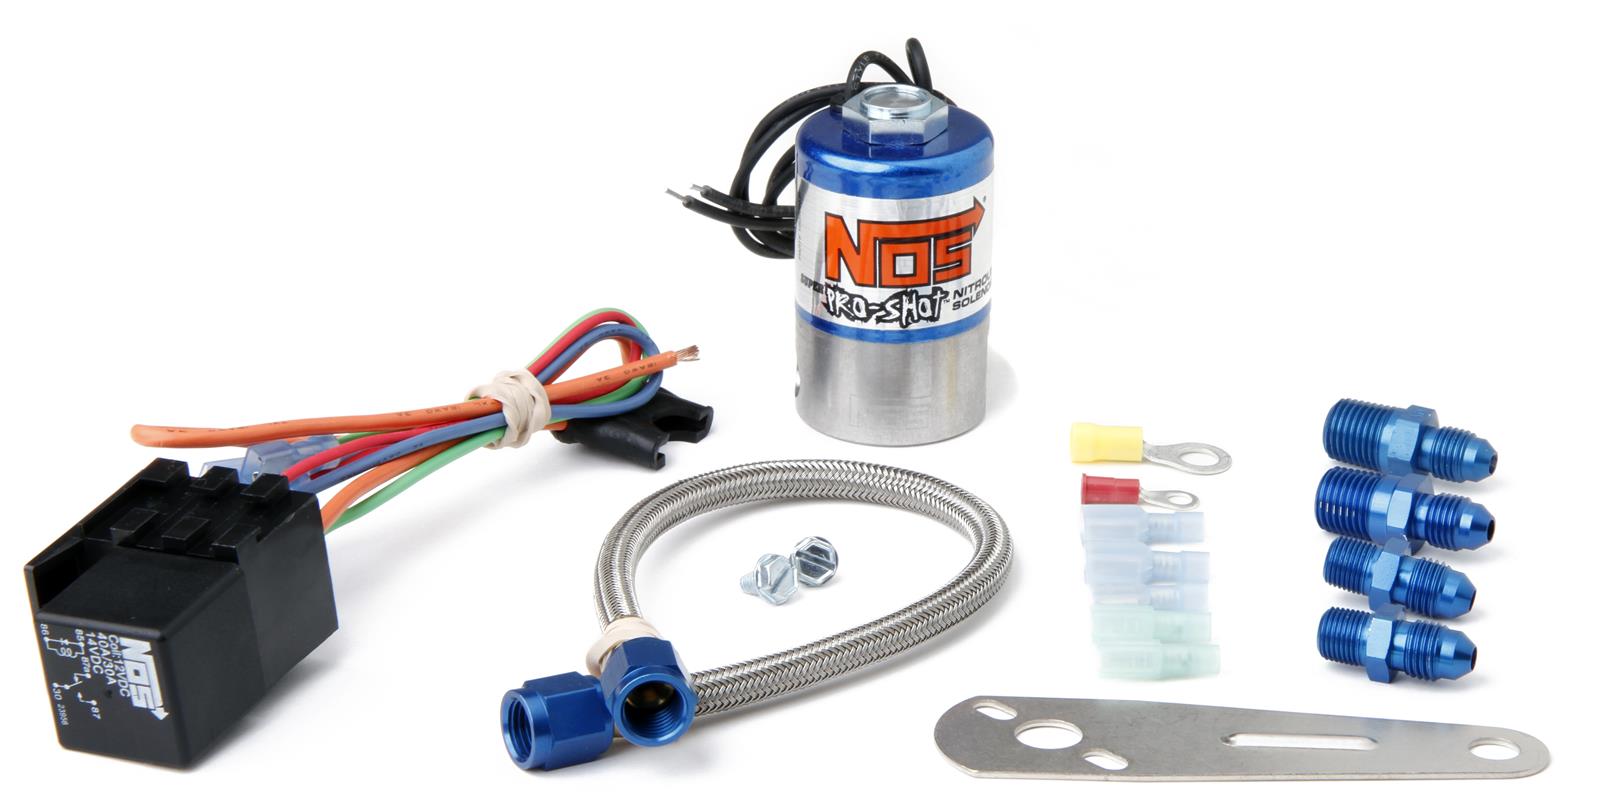 www.sixpackmotors-shop.ch - NOS SAFETY APPLICATION